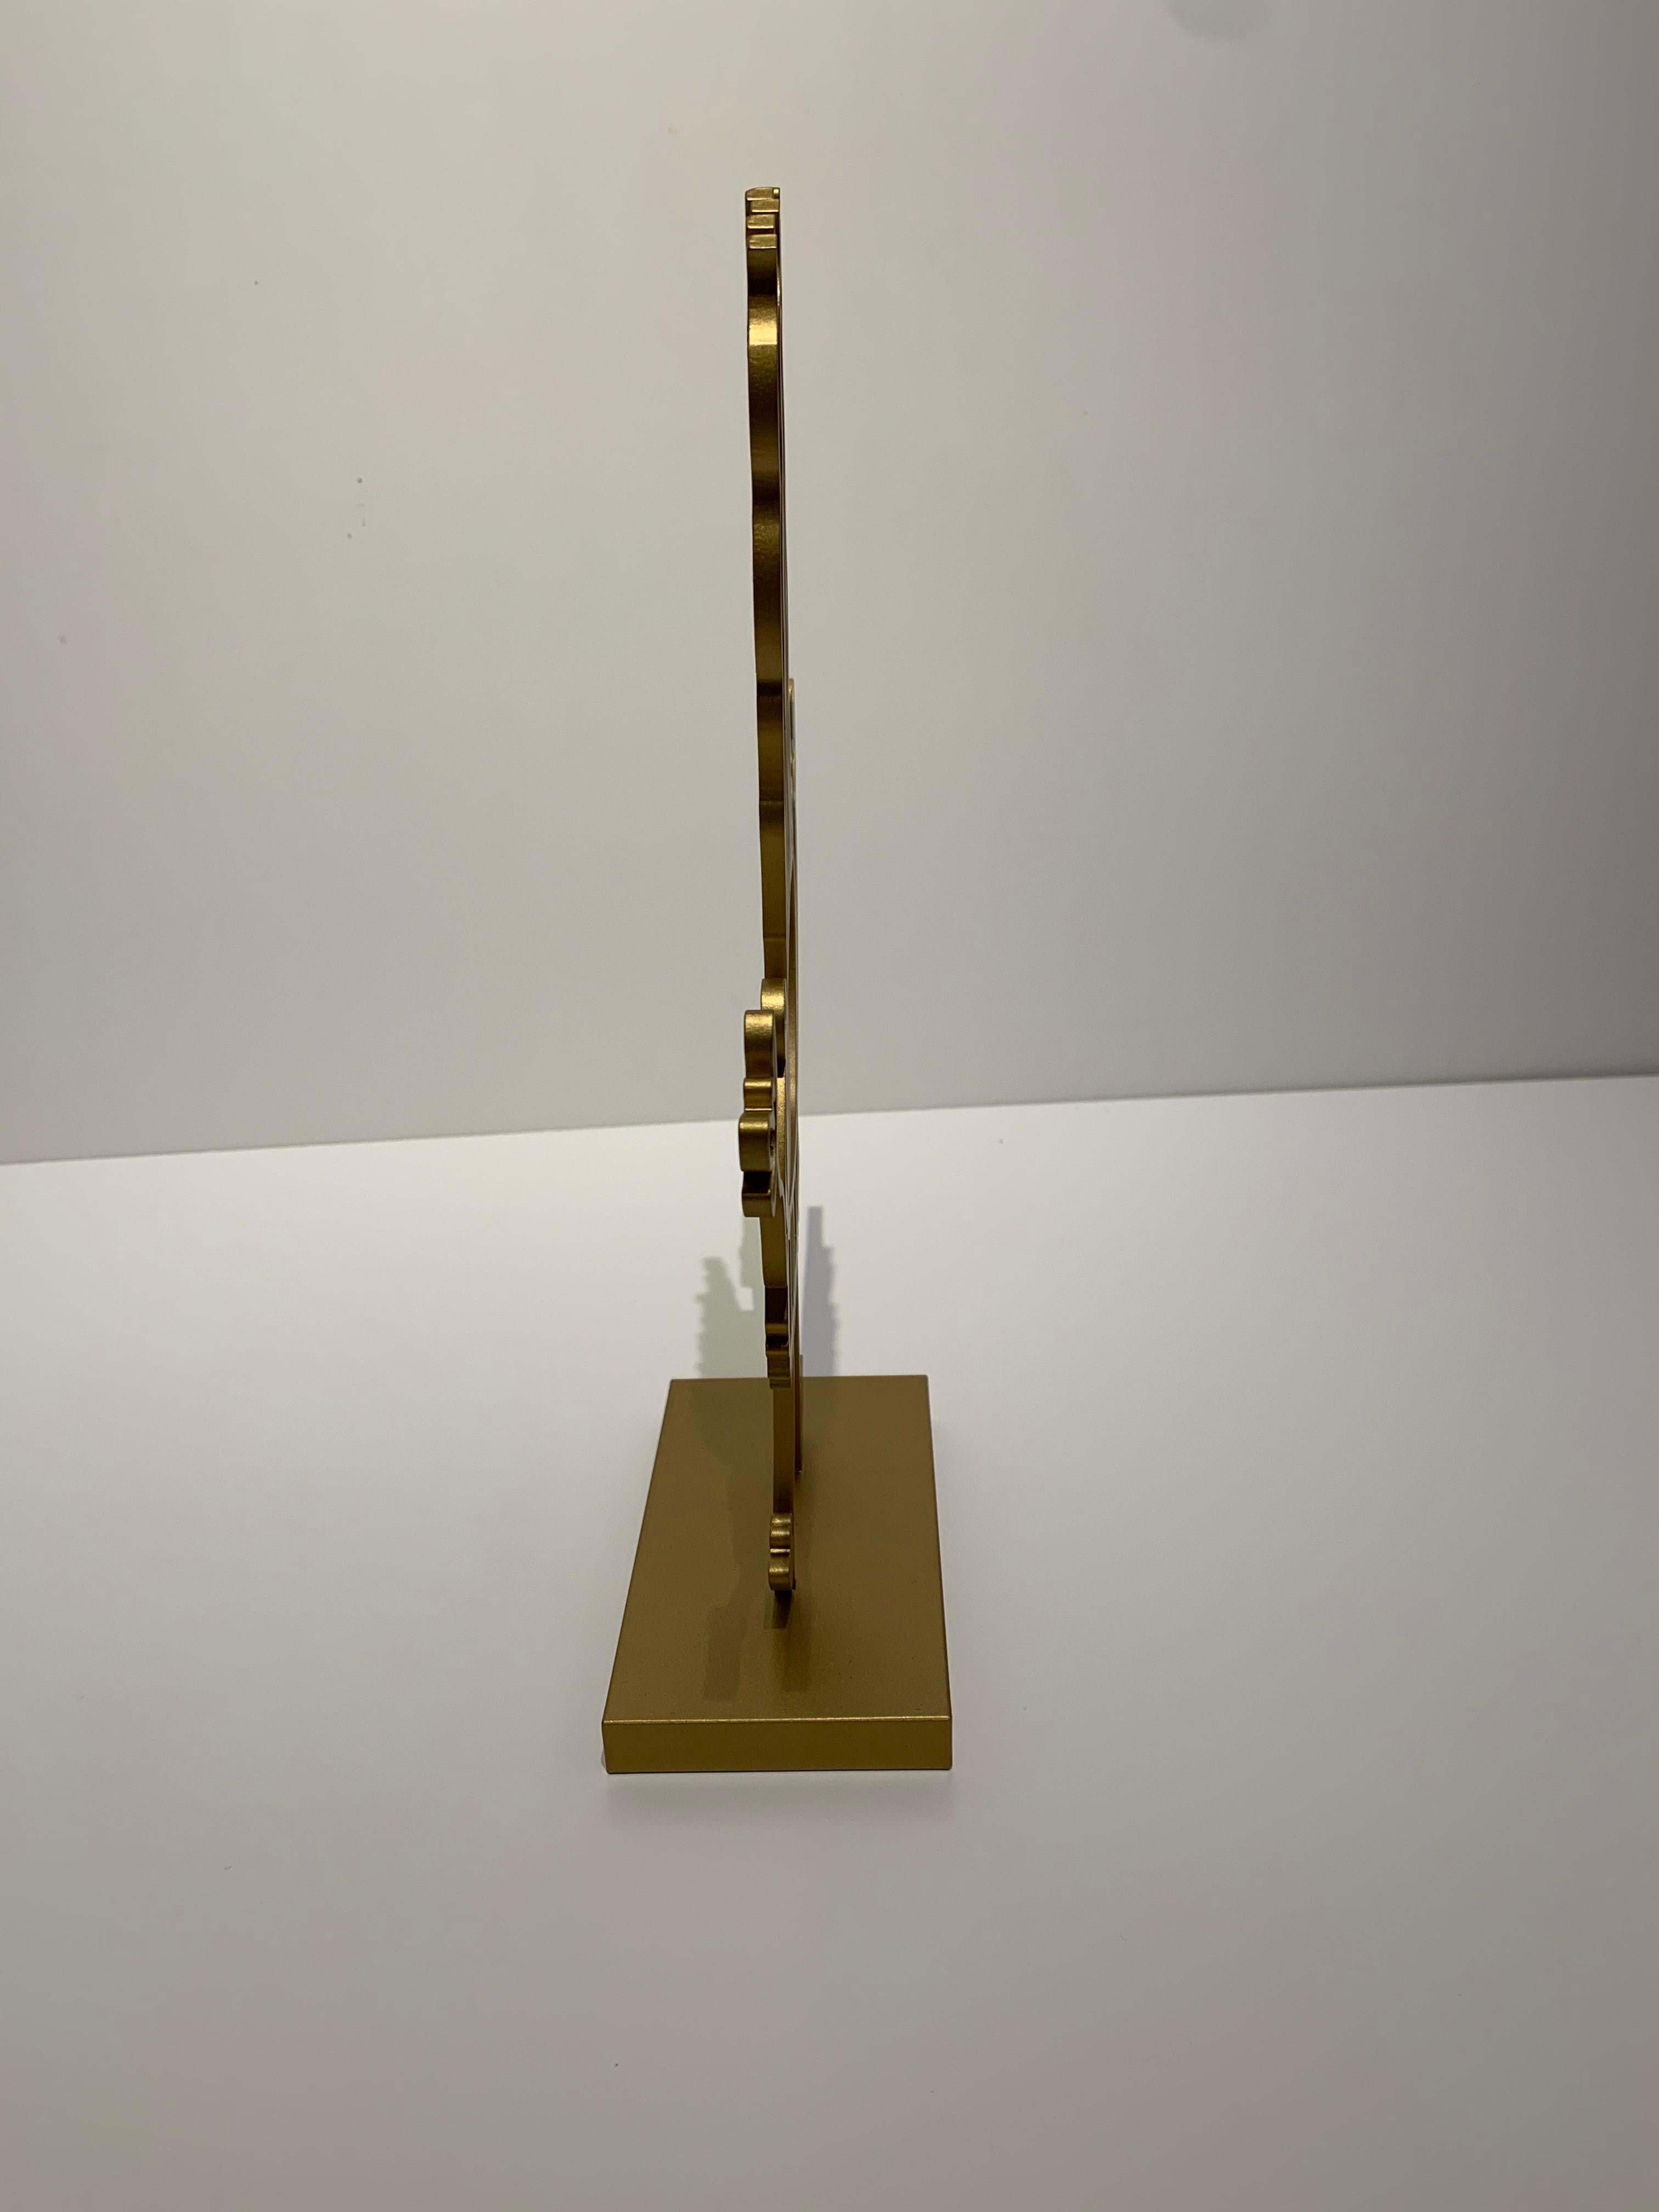 Xavi Carbonell, Untitled 2019, Gold Painted Metal Sculpture 2/25 3